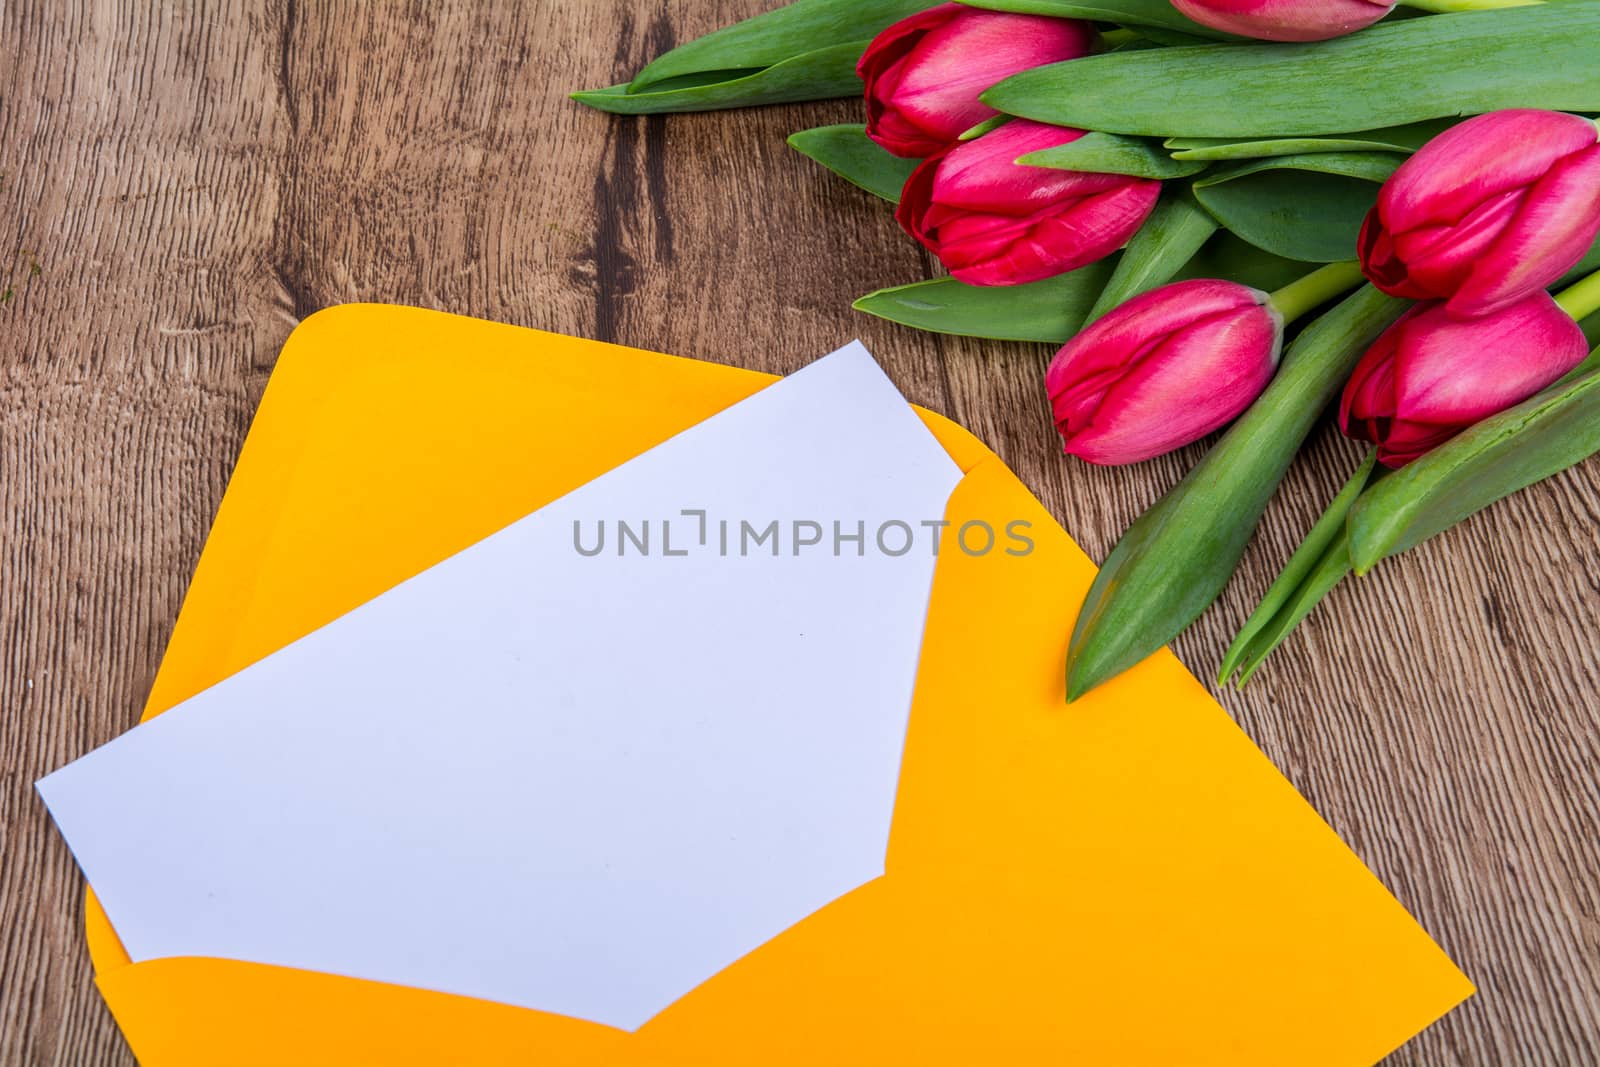 Pink envelope with tulips on a wooden table